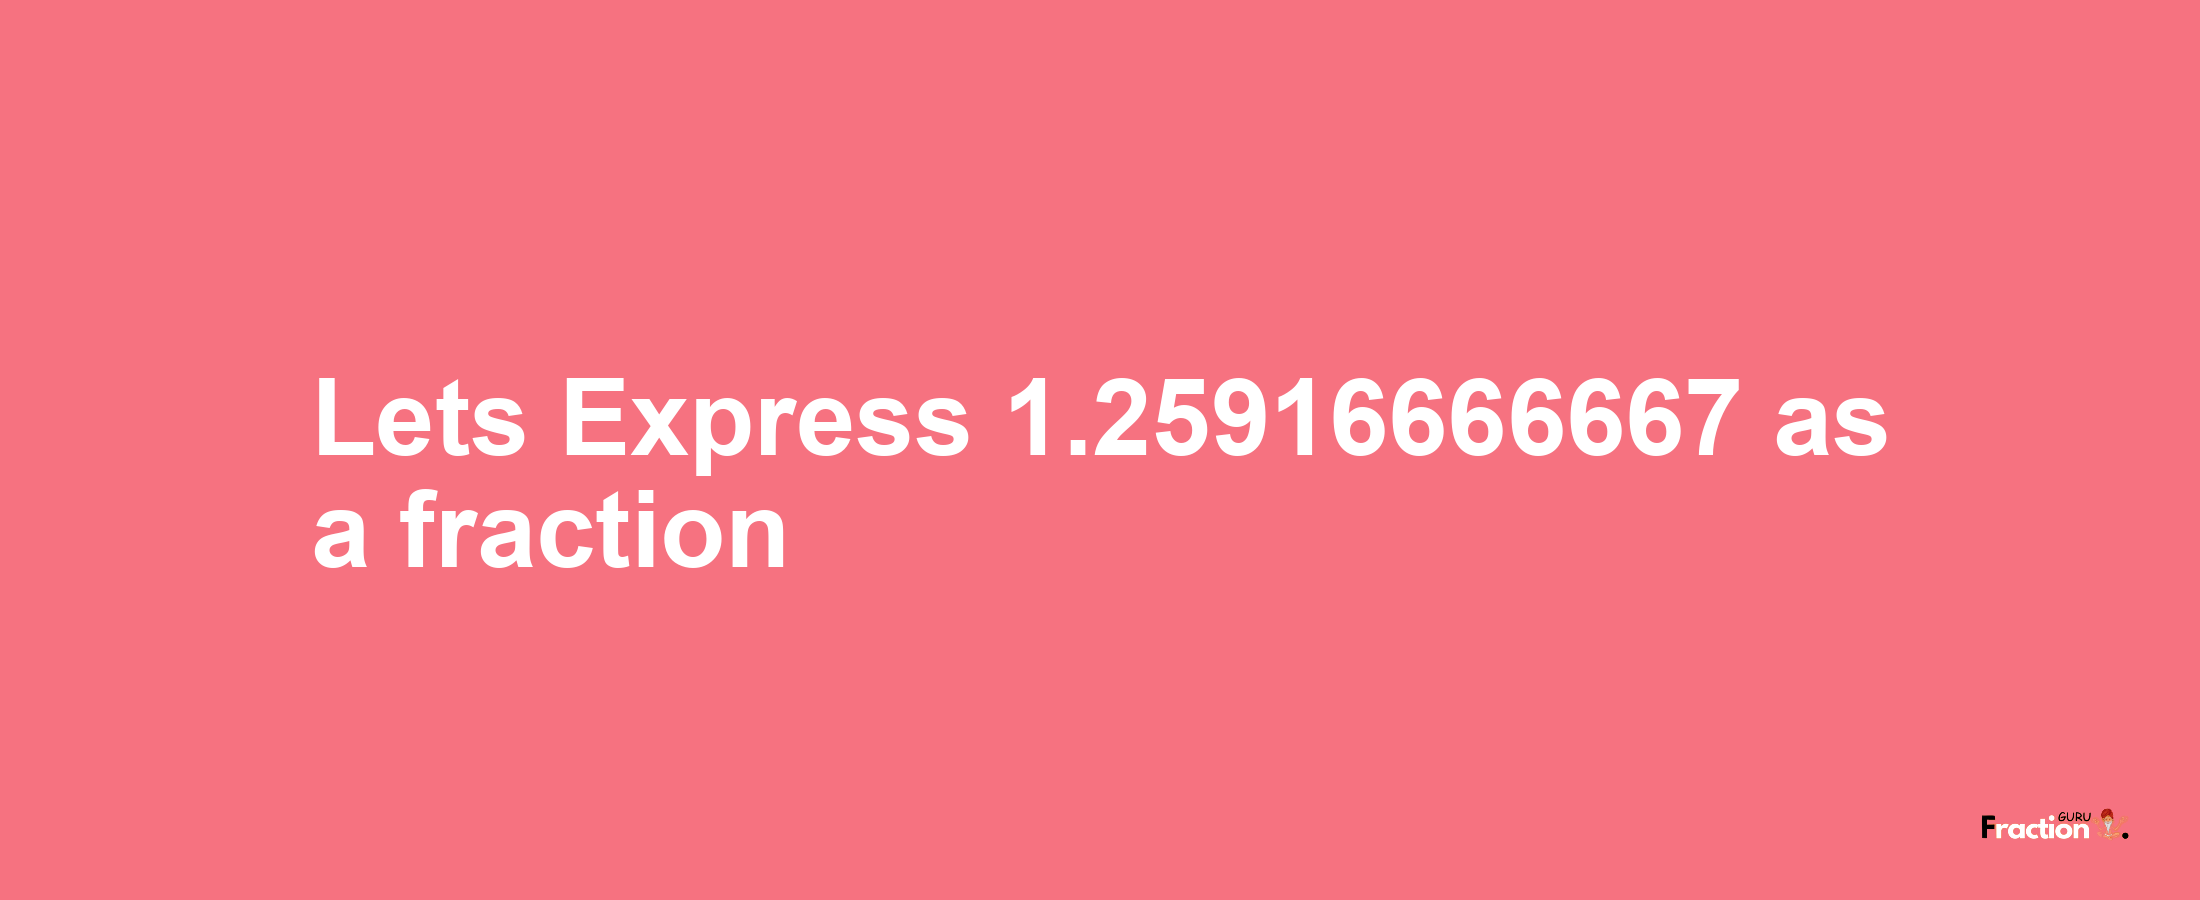 Lets Express 1.25916666667 as afraction